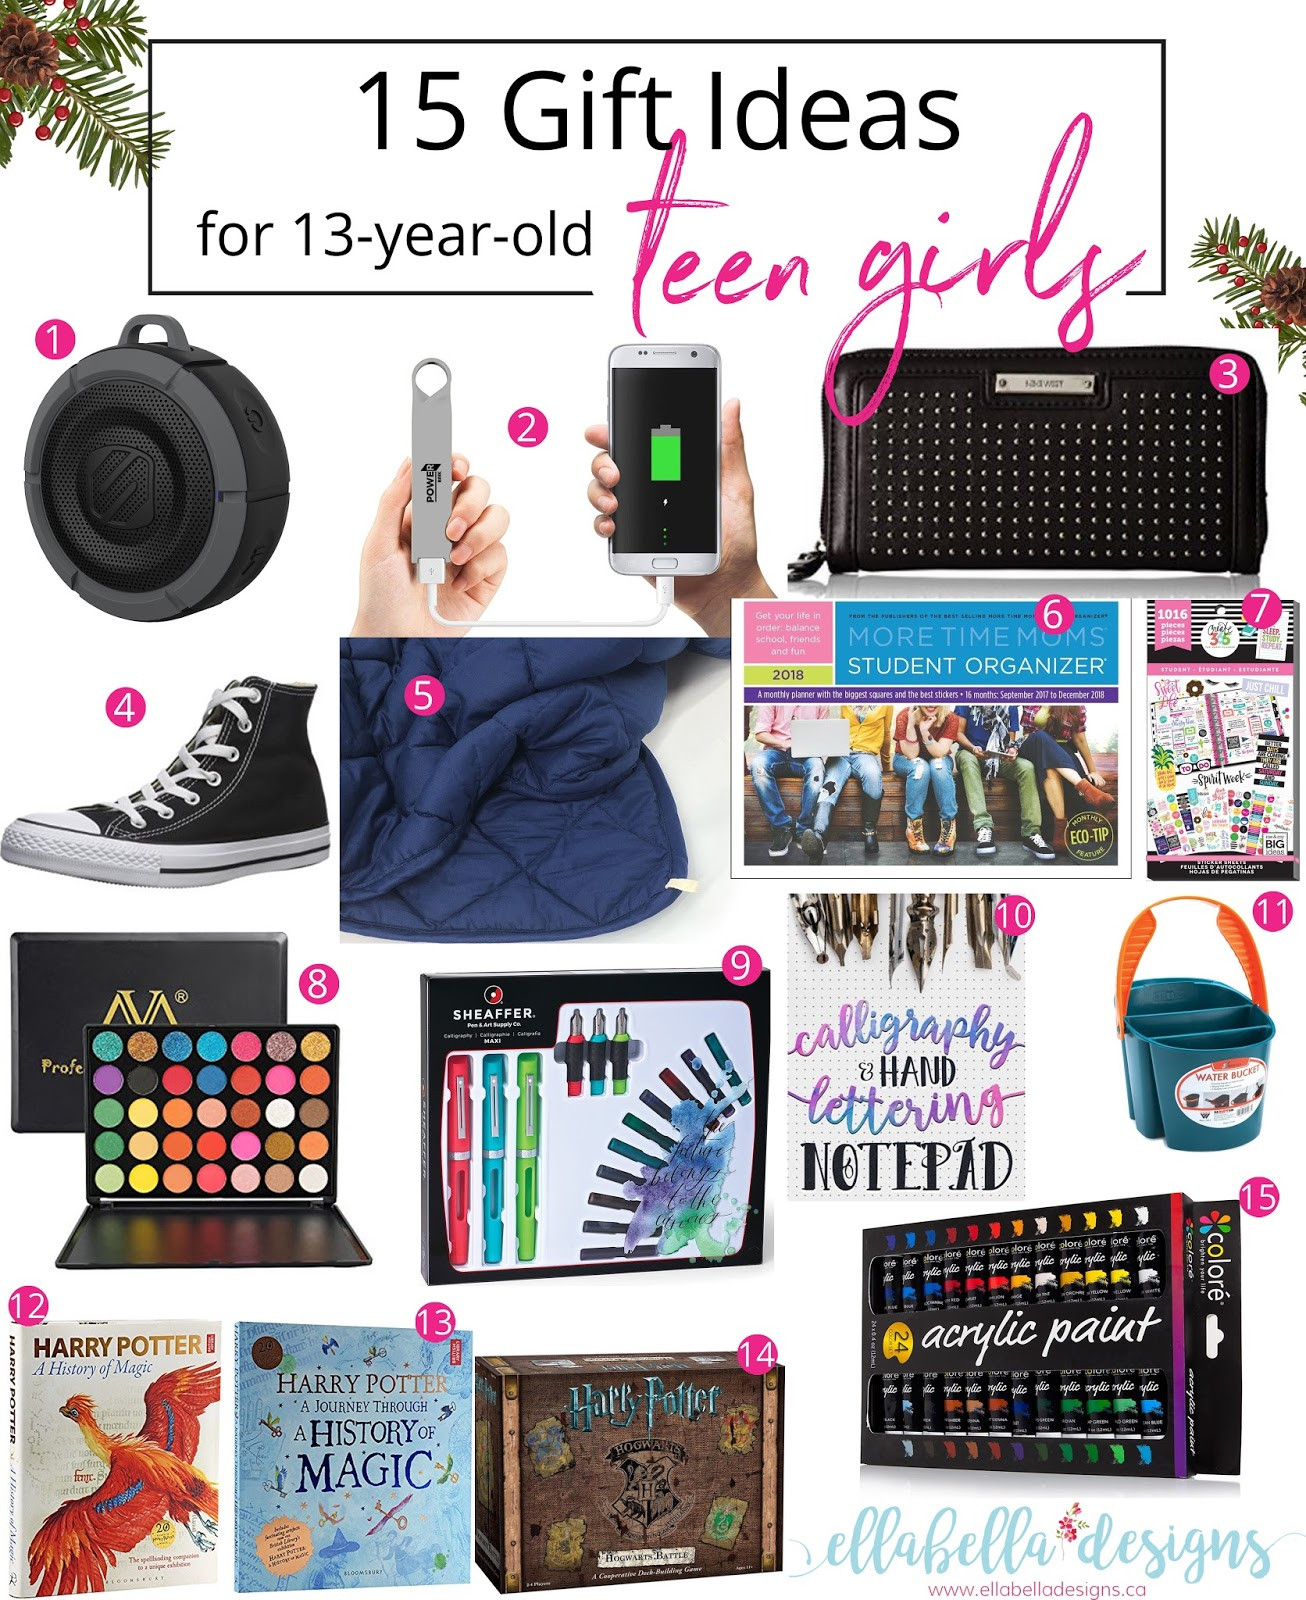 20 Of the Best Ideas for 13th Birthday Gift Ideas Home, Family, Style